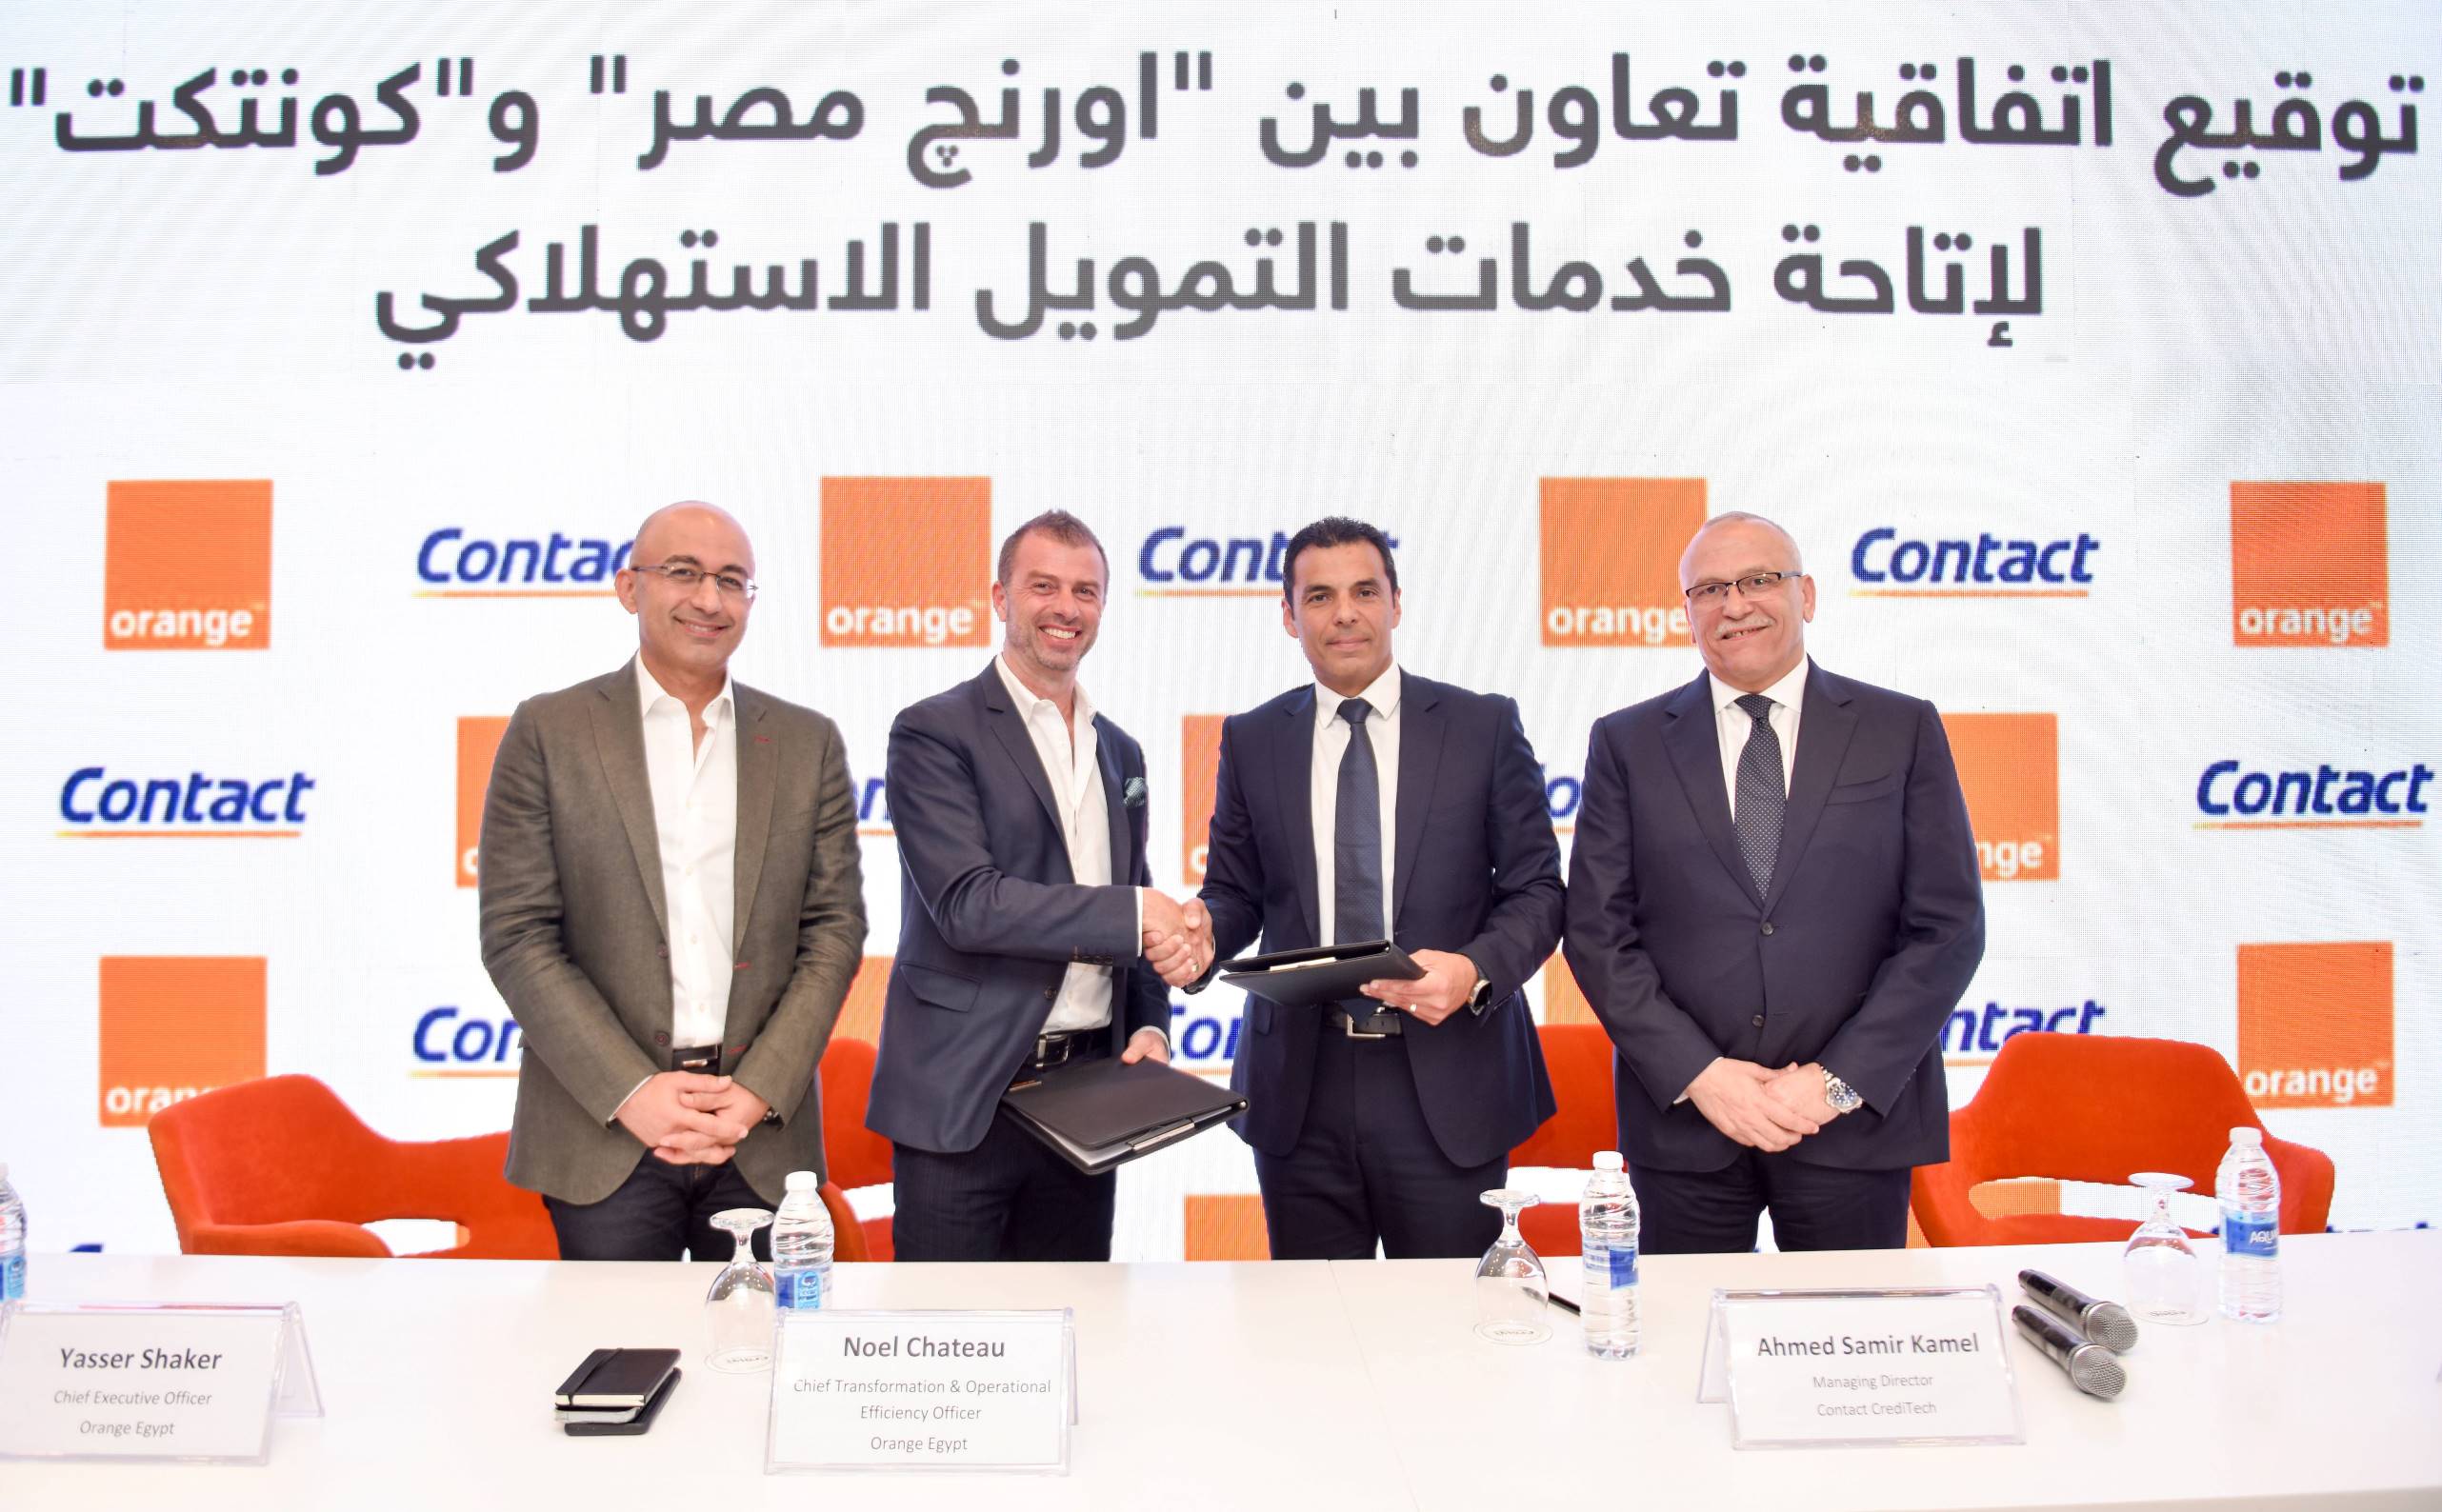 Orange Egypt signs a cooperation agreement with Contact to provide customers with consumer finance services and exclusive installment offers